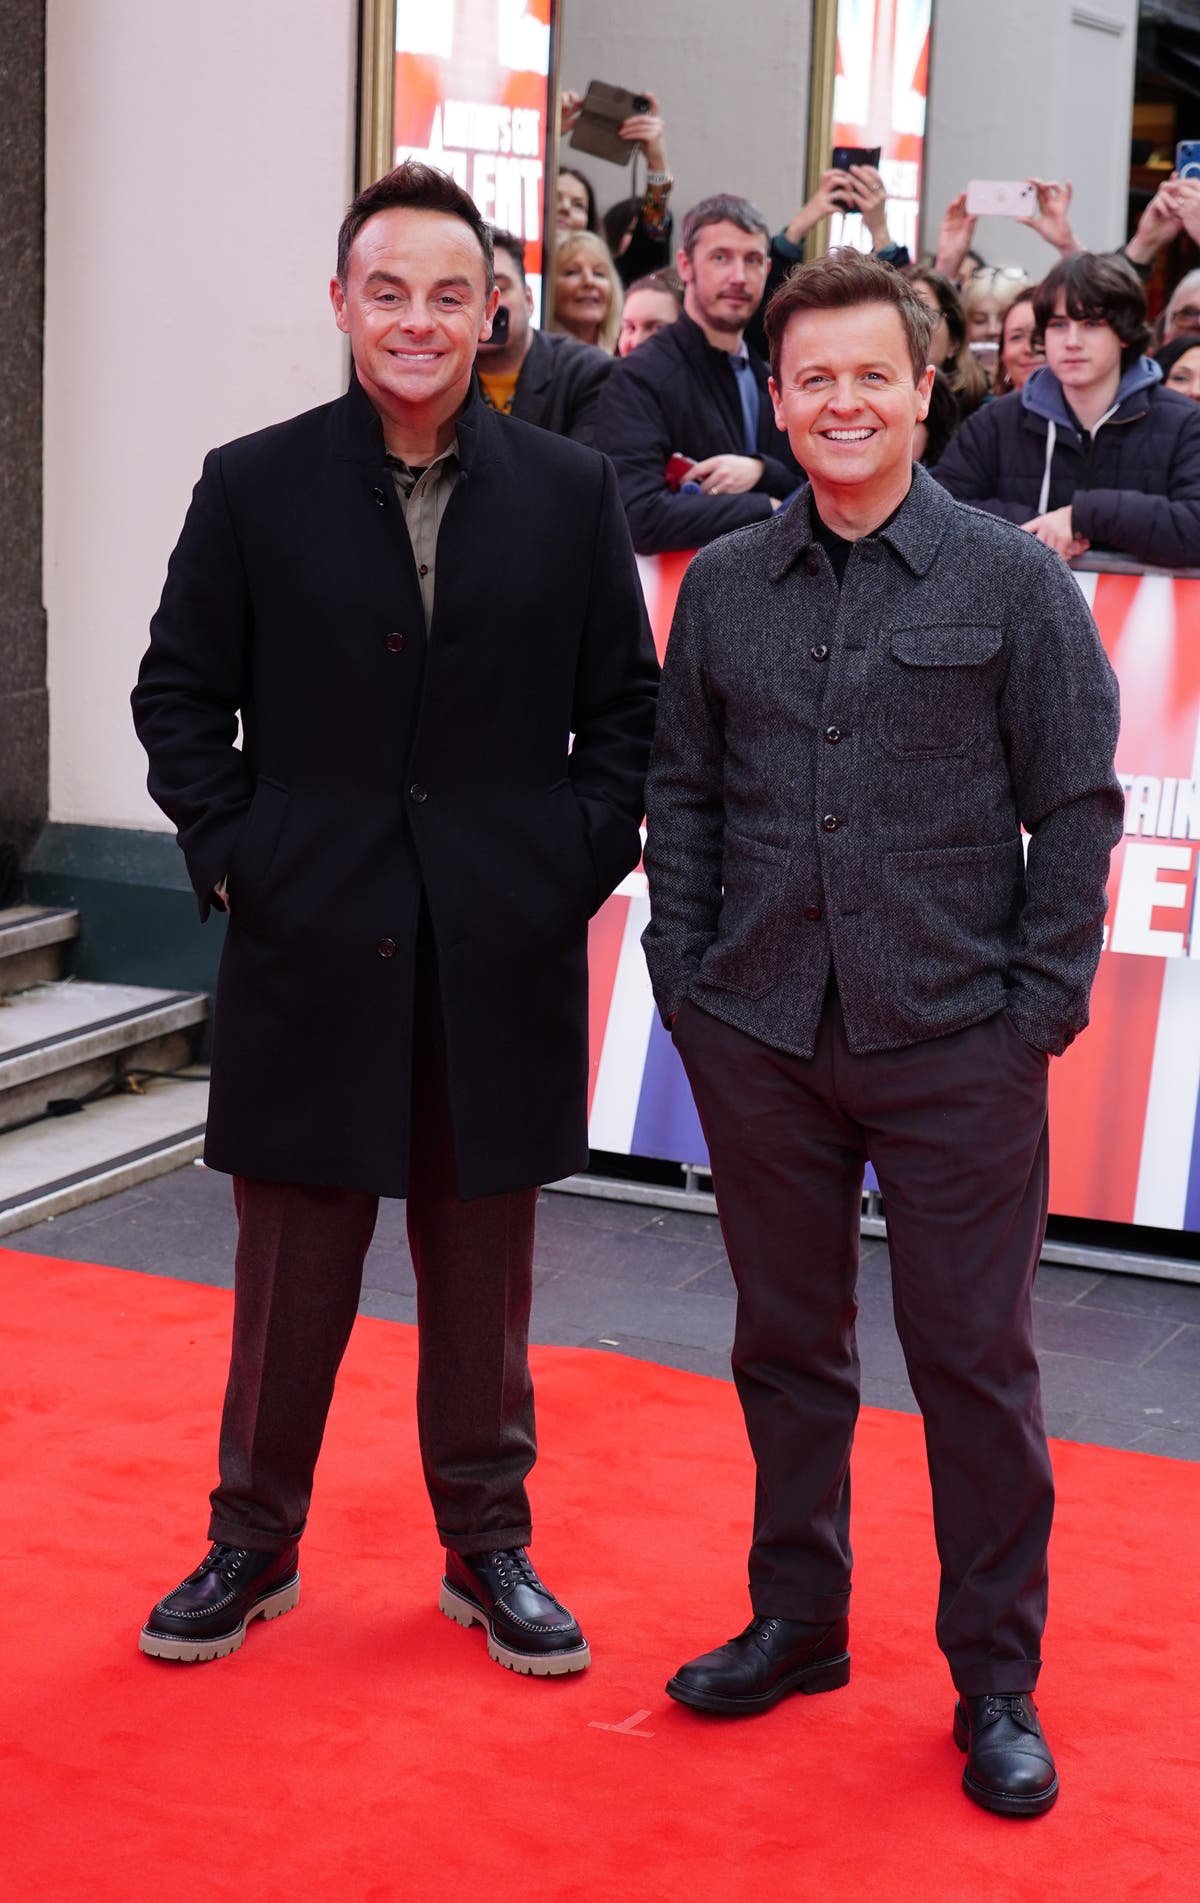 Ant and Dec reveal Britain's Got Talent breaks show record ahead of return